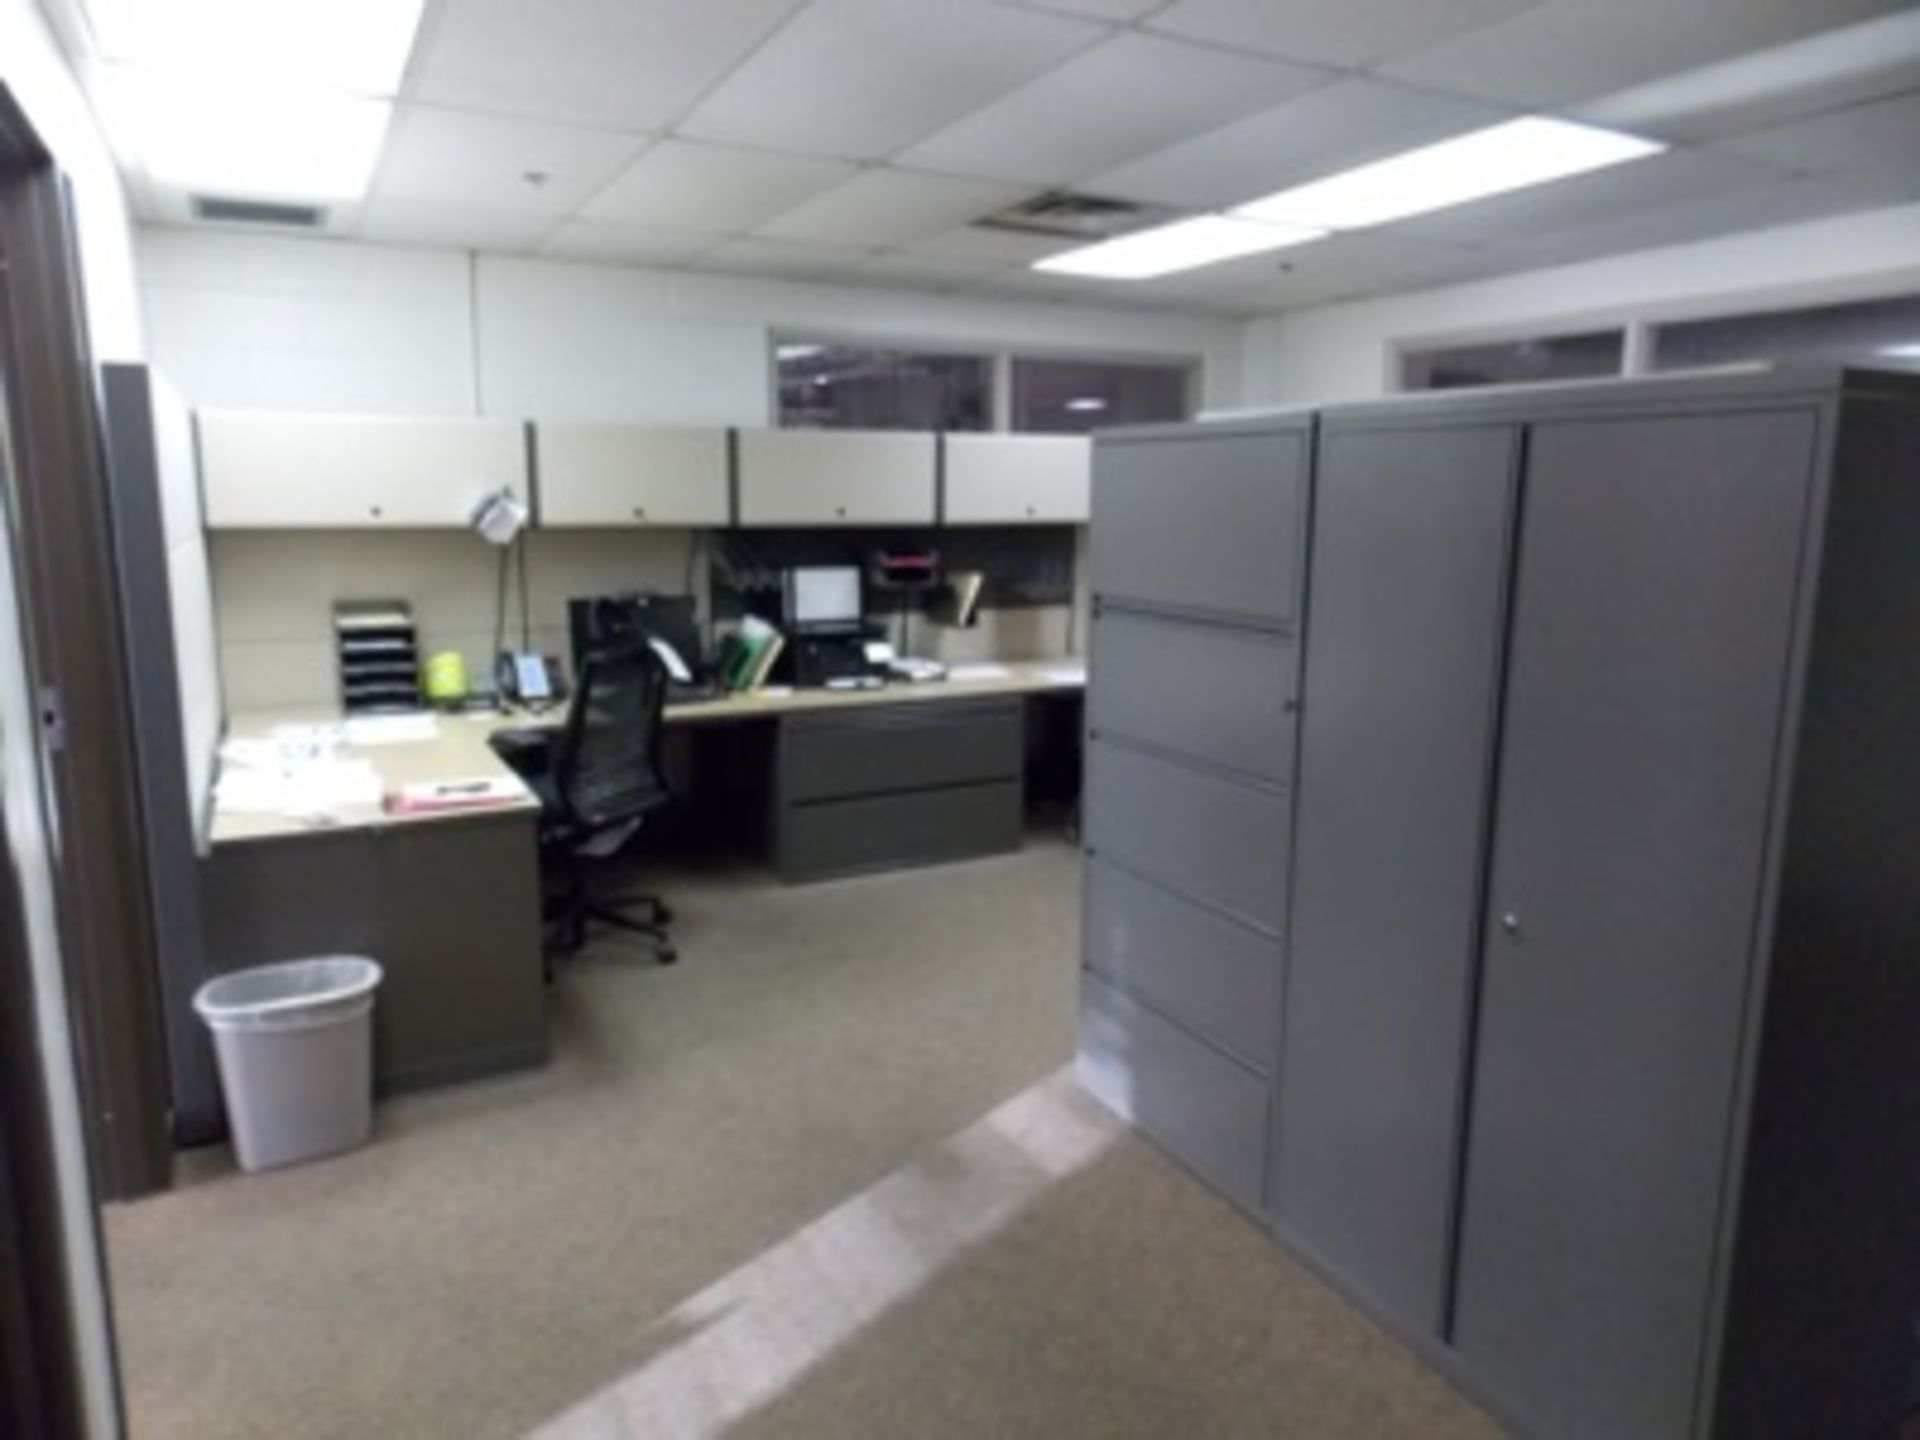 (Lot) Office Furniture in Room (No Phones, - Image 2 of 2